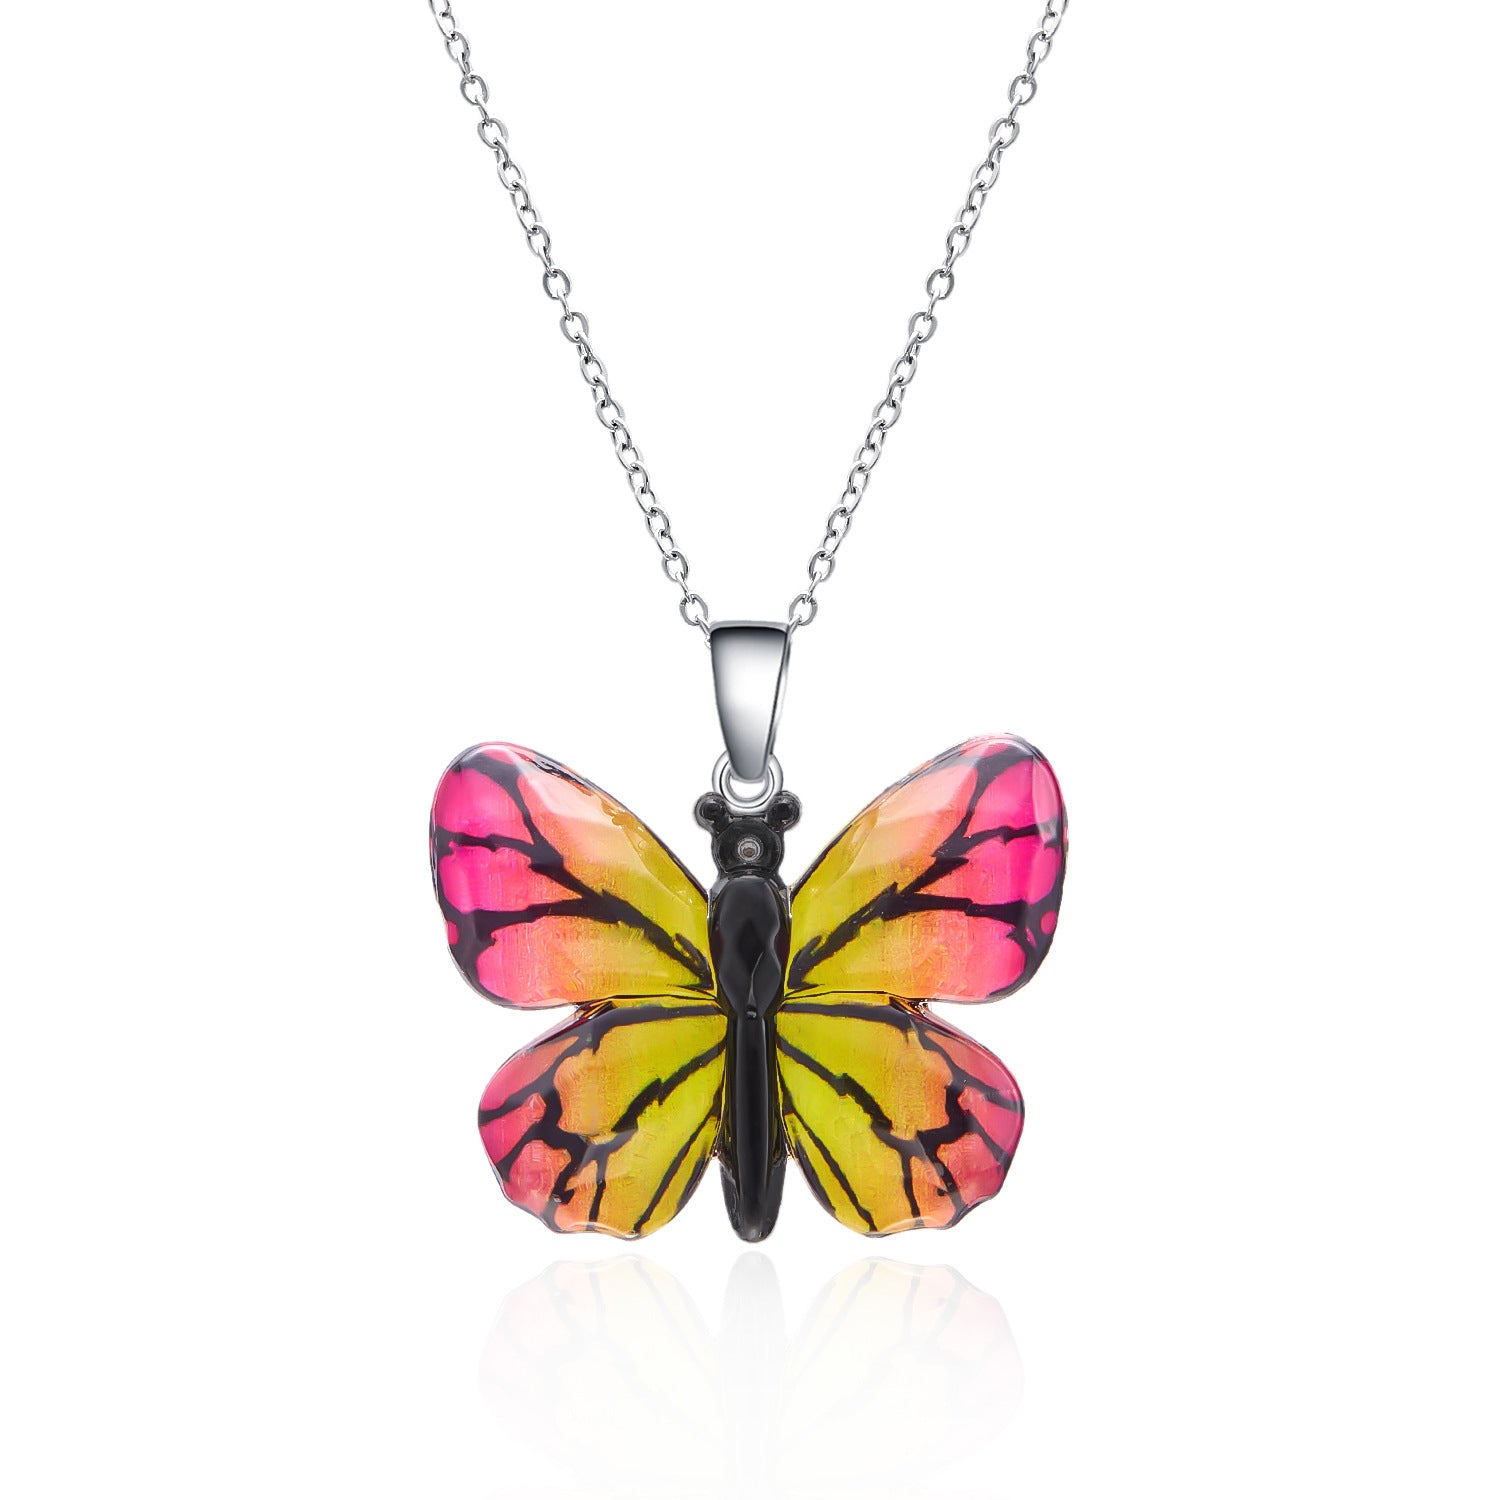 Women's Stainless Steel Retro Multi-color Butterfly Necklace